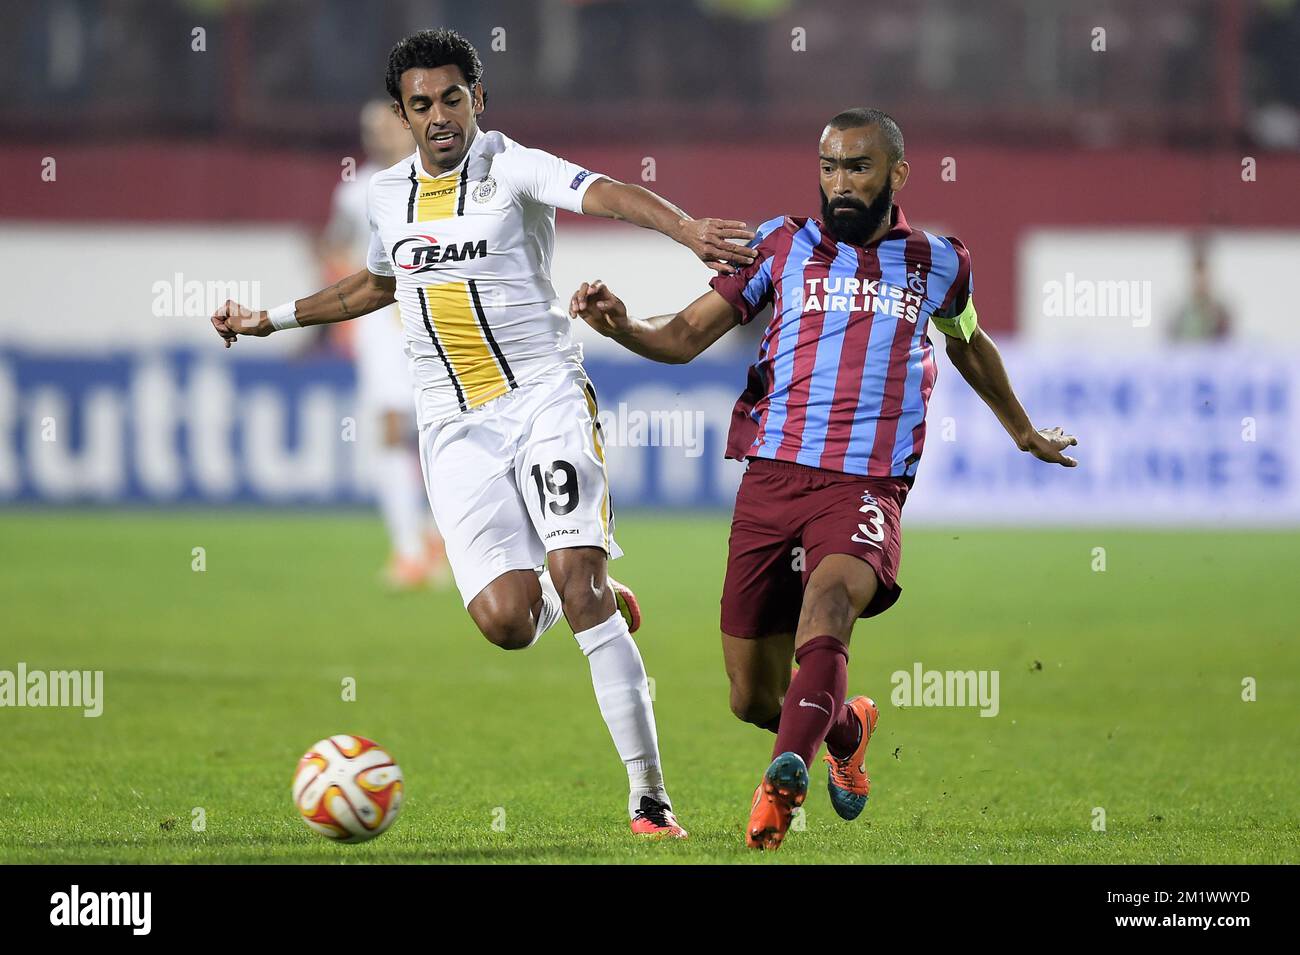 20141023 - TRABZON, TURKEY: Lokeren's Sergio Junior Dutra and Trabzonspor's Jose Bosingwa fight for the ball during a game between Turkish club Trabzonspor AS and Belgian soccer team KSC Lokeren OVL in the Huseyin Avni Aker Stadium in Trabzon, Thursday 23 October 2014. It is the third day of the group stage of the UEFA Europa League competition, in group L. BELGA PHOTO YORICK JANSENS Stock Photo